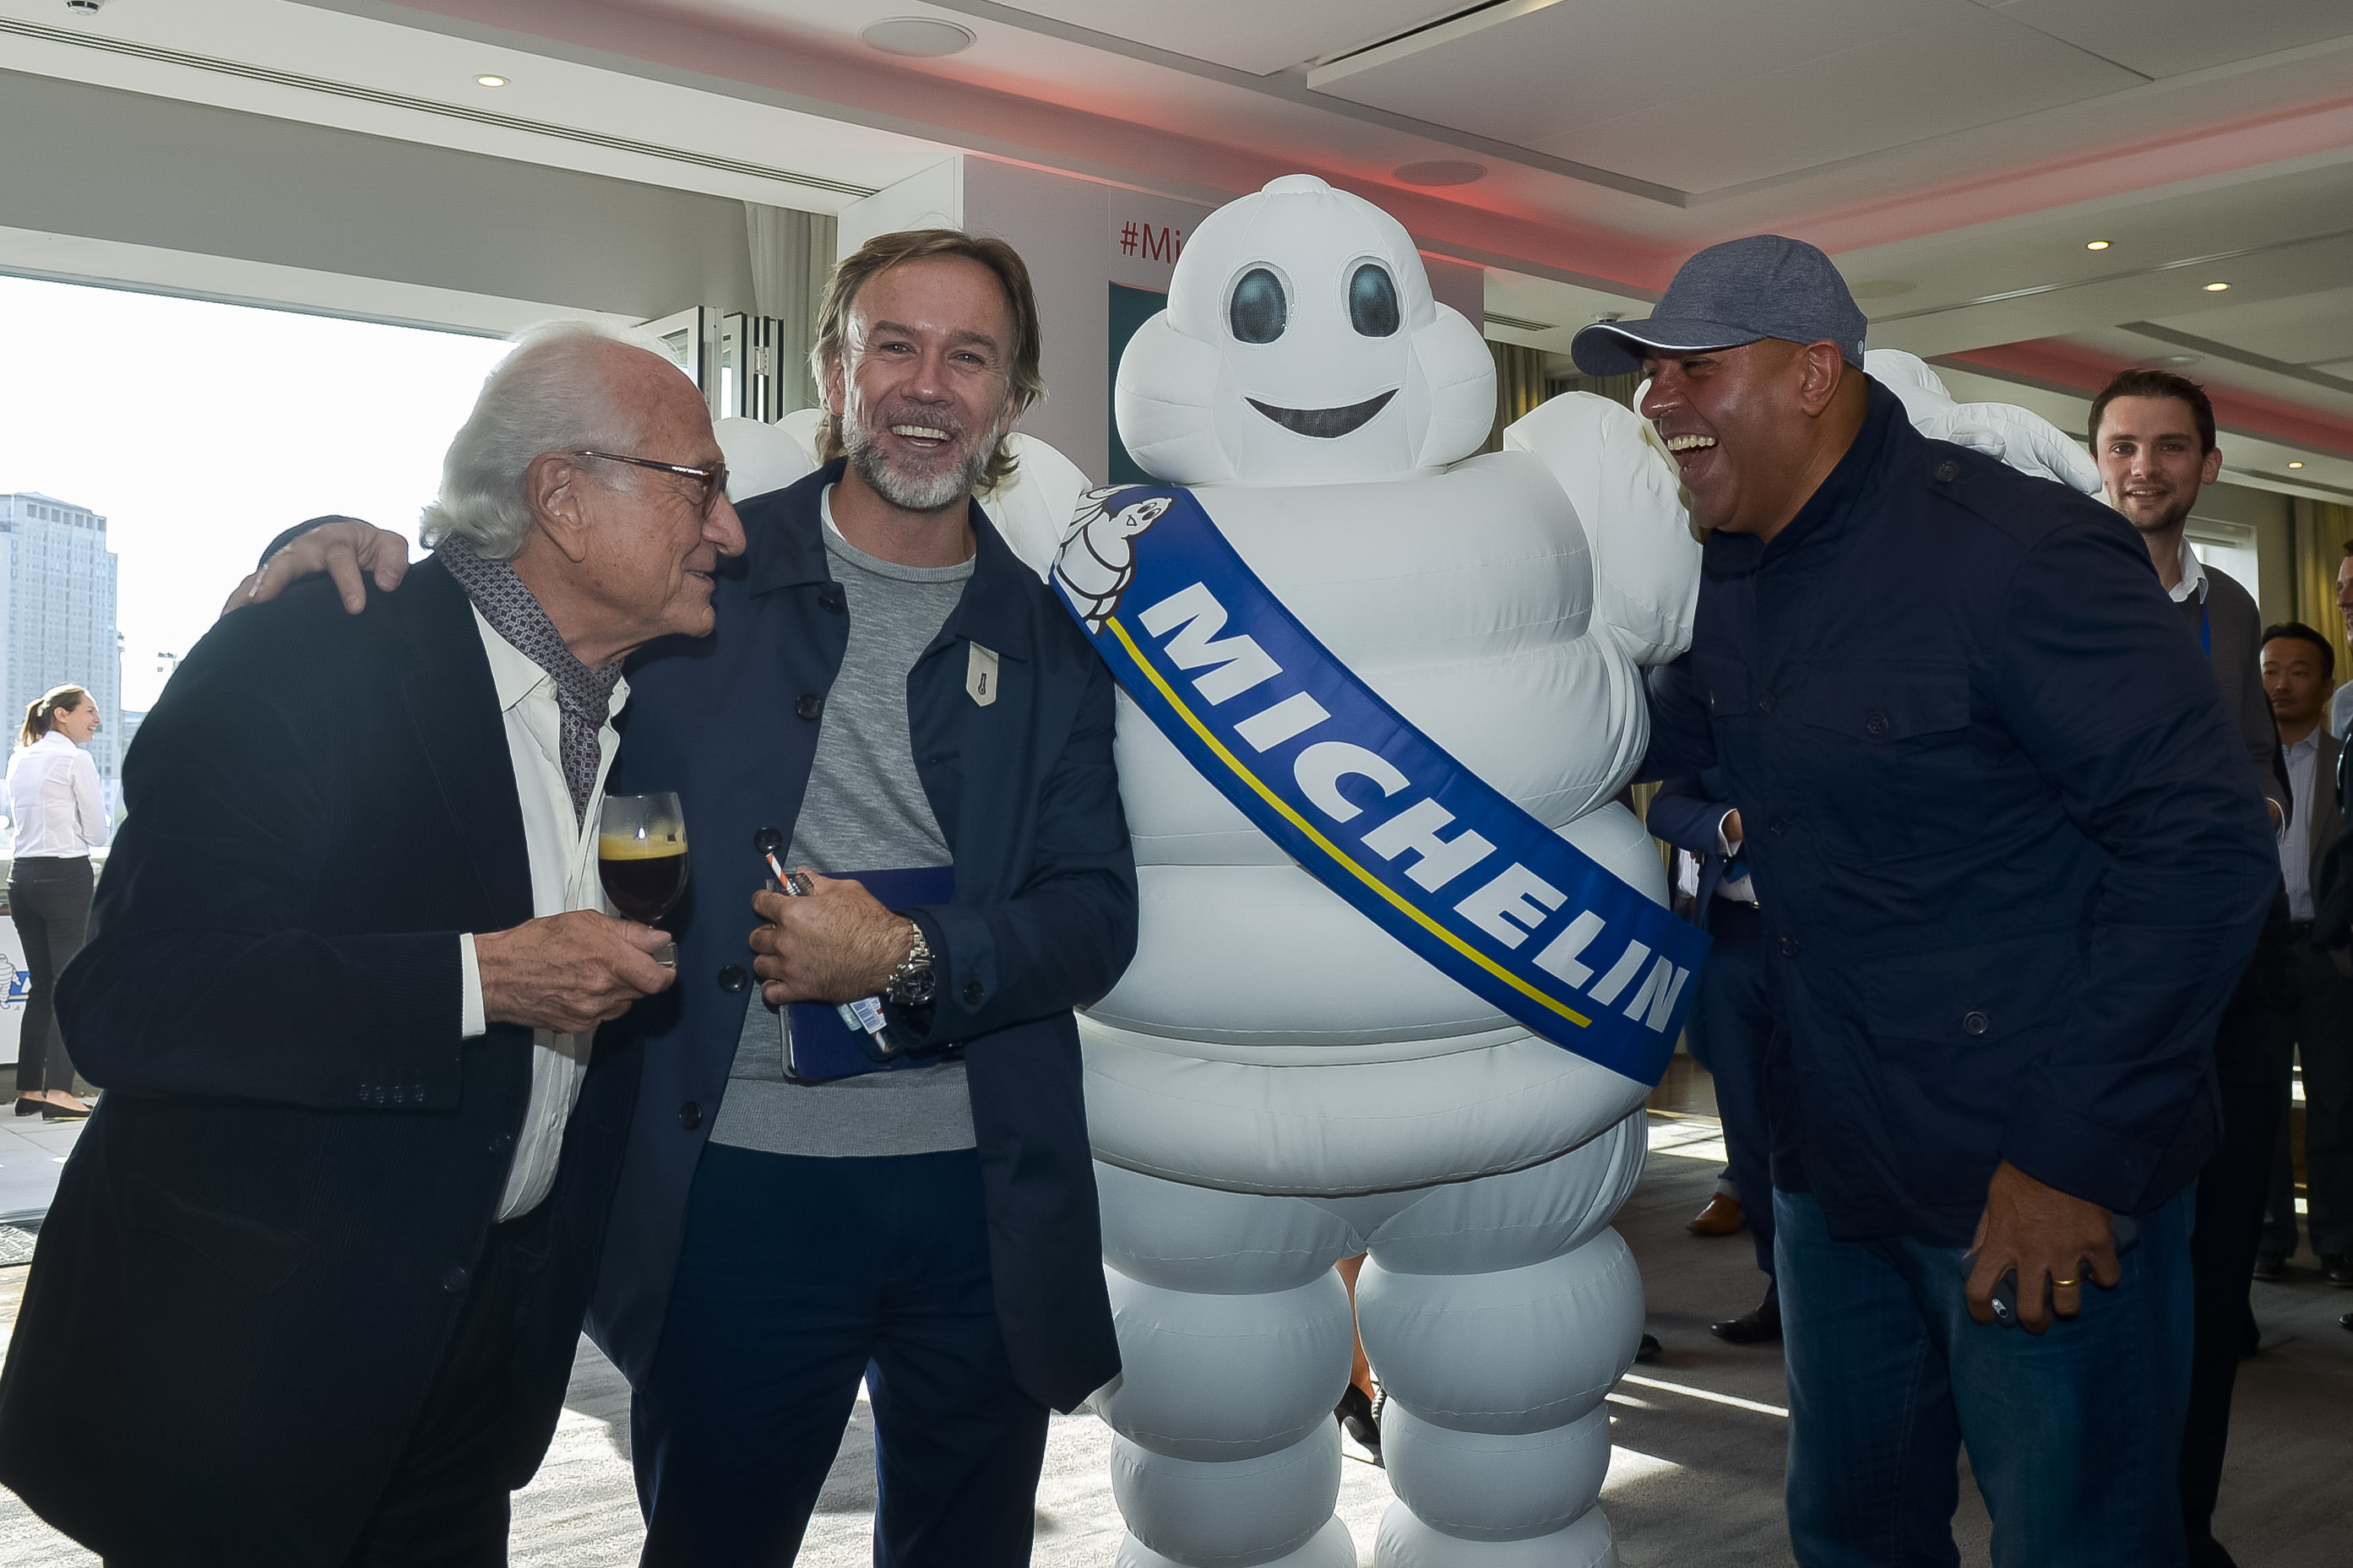 Marcus Wareing and Sat Bains at Michelin Guide’s Michelin stars announcement in 2018